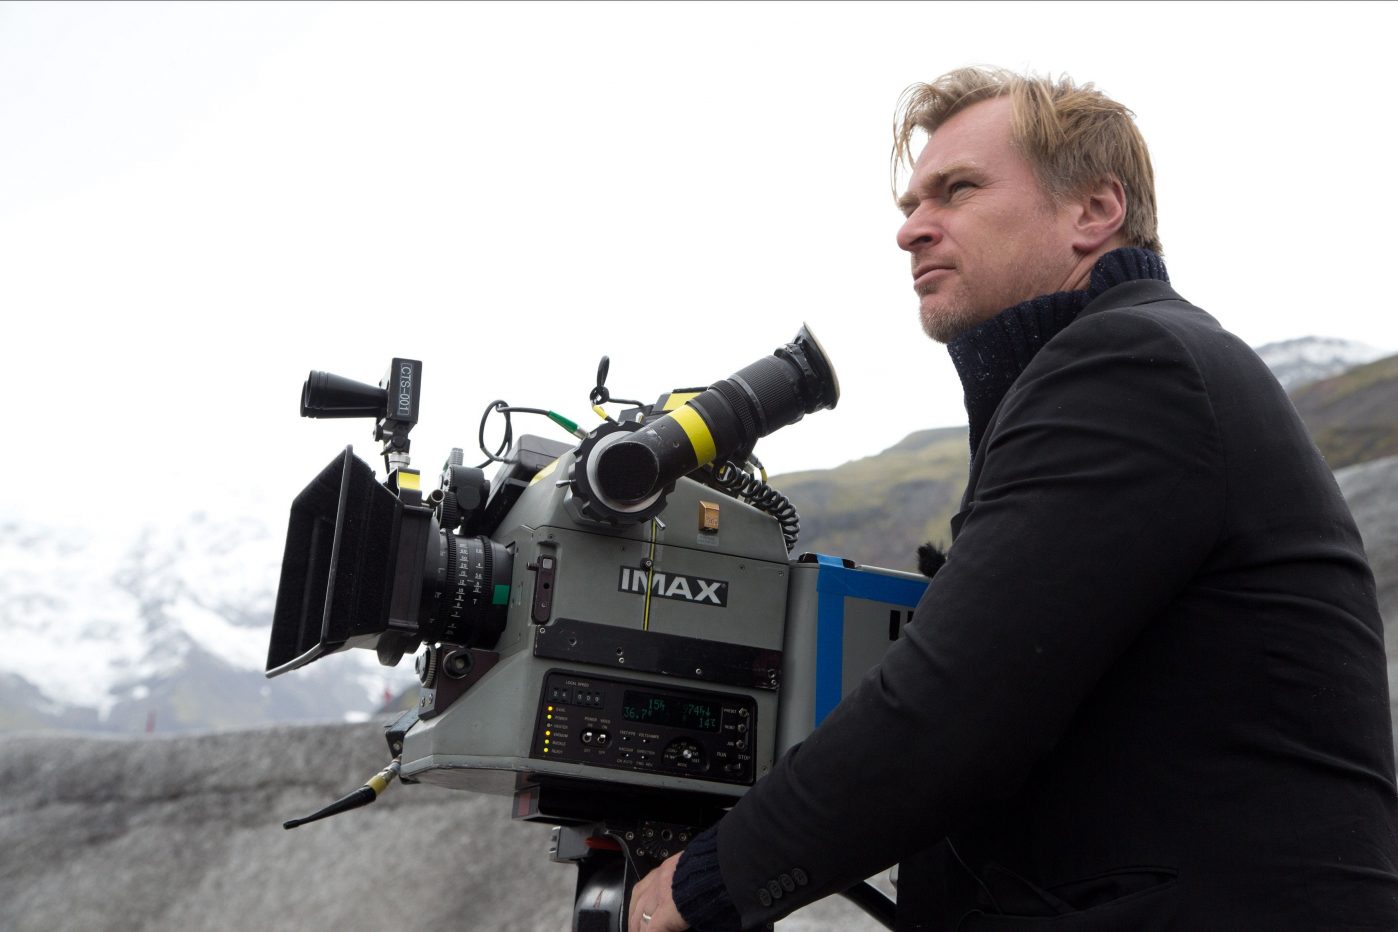 Chris Nolan says he's DC days are over